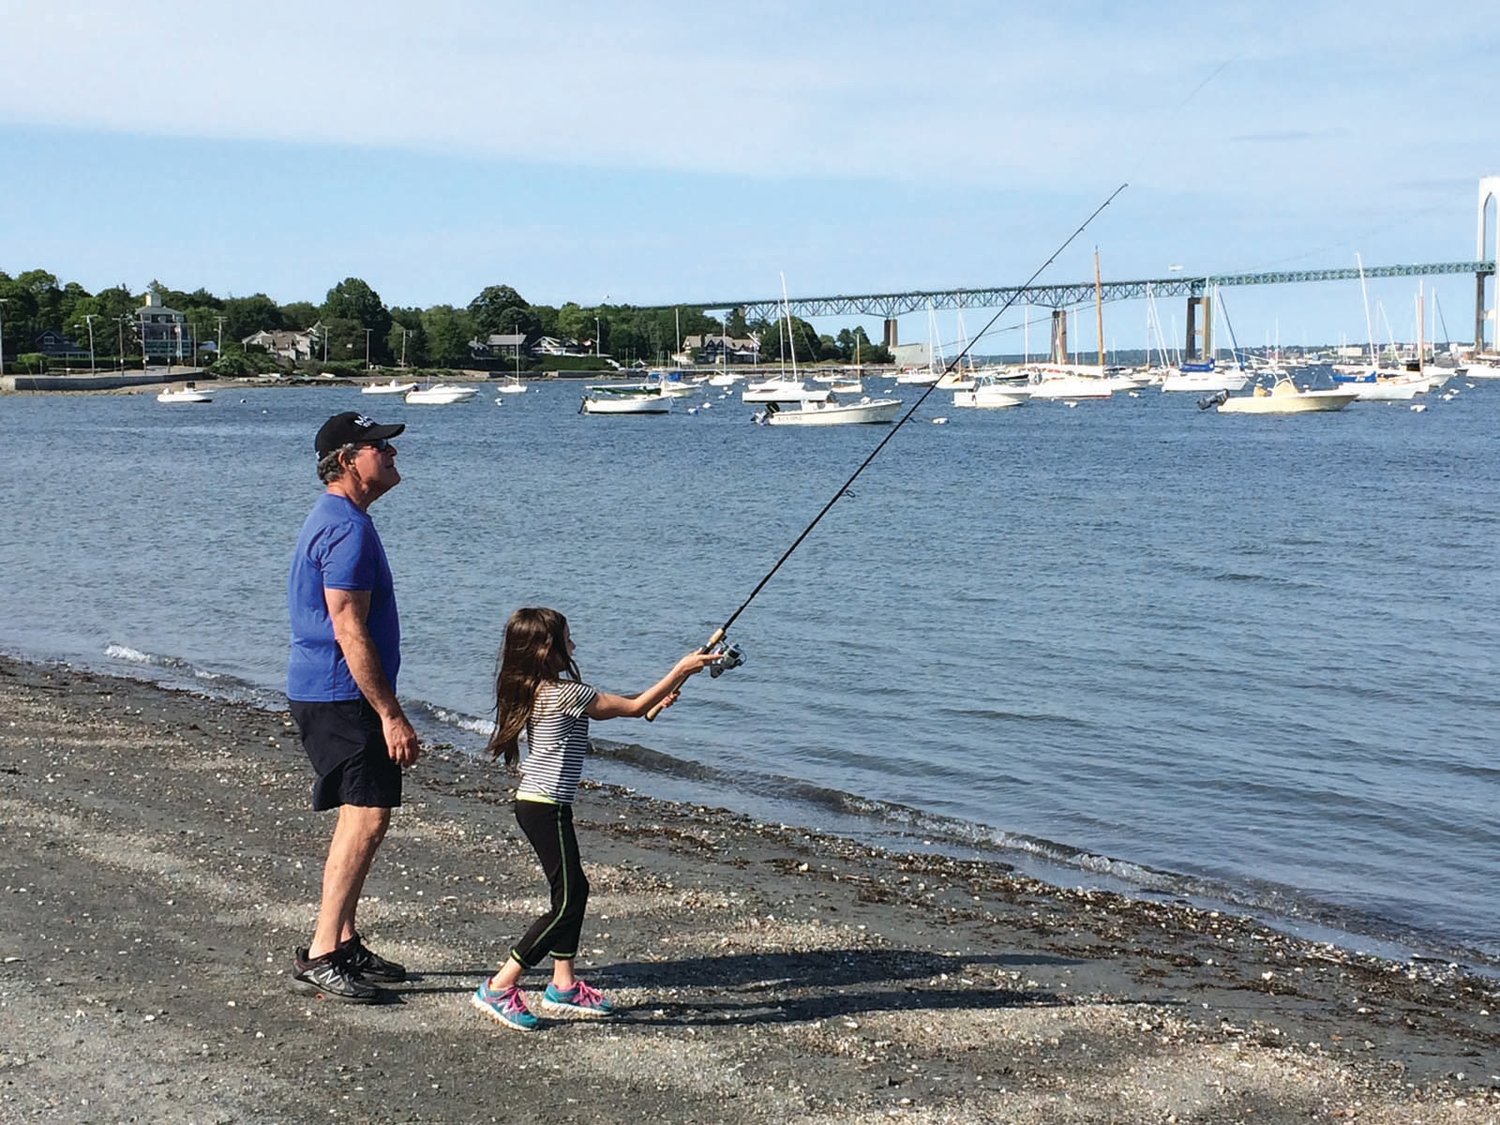 PRACTICING YOUR CAST: Capt. Ken Cooper with his granddaughter Rayna (then 7 years old) practicing casting in Jamestown with the Newport
Bridge in the background.